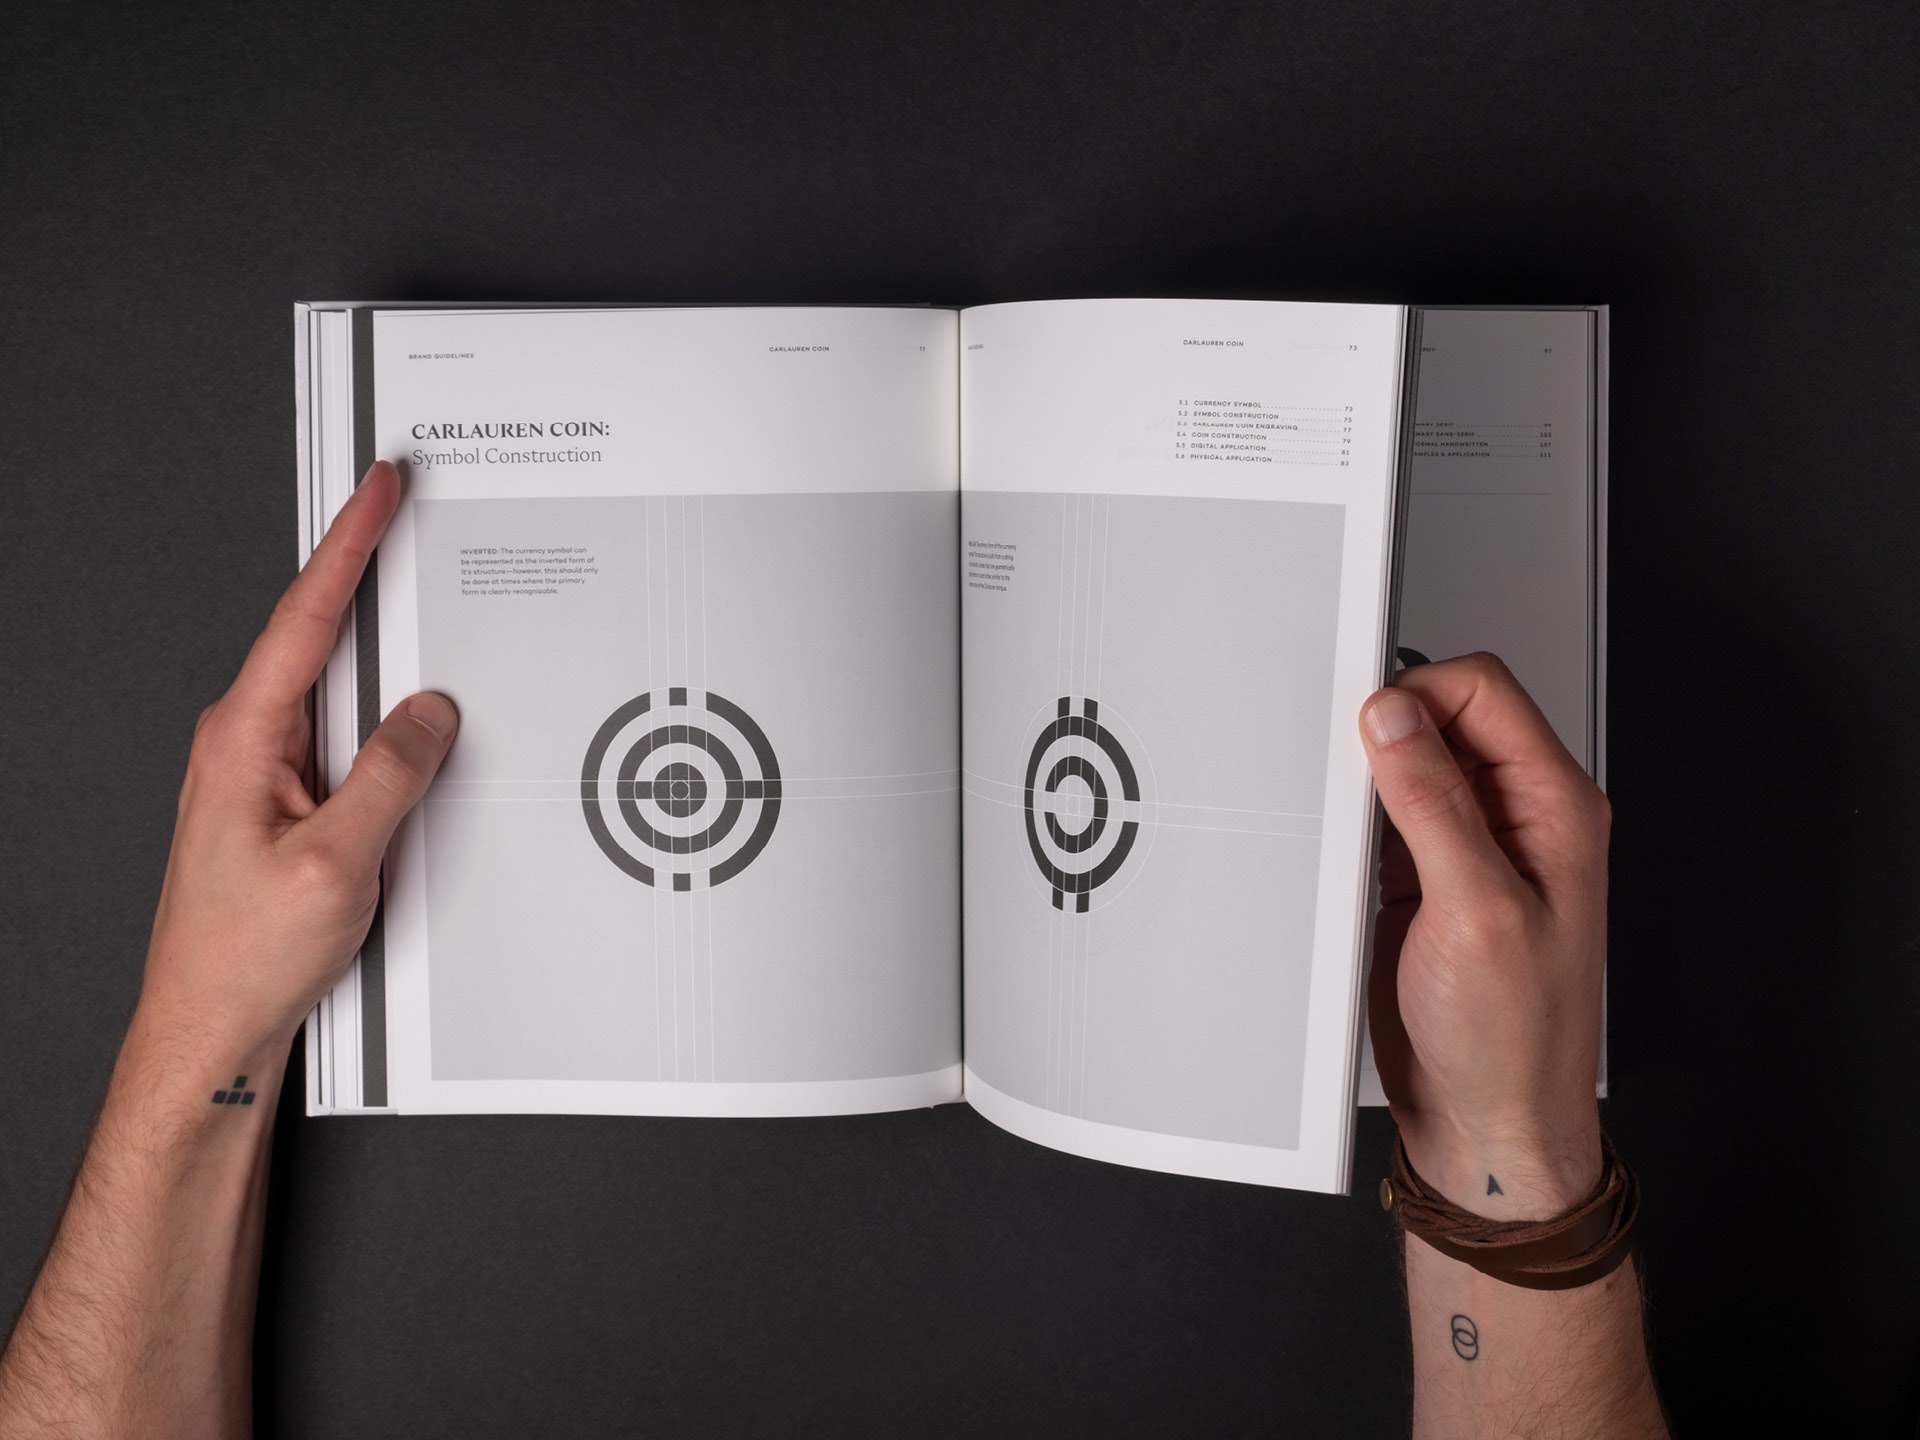 A printed spread from the Carlauren guidelines showcasing the currency icon featured on the coin